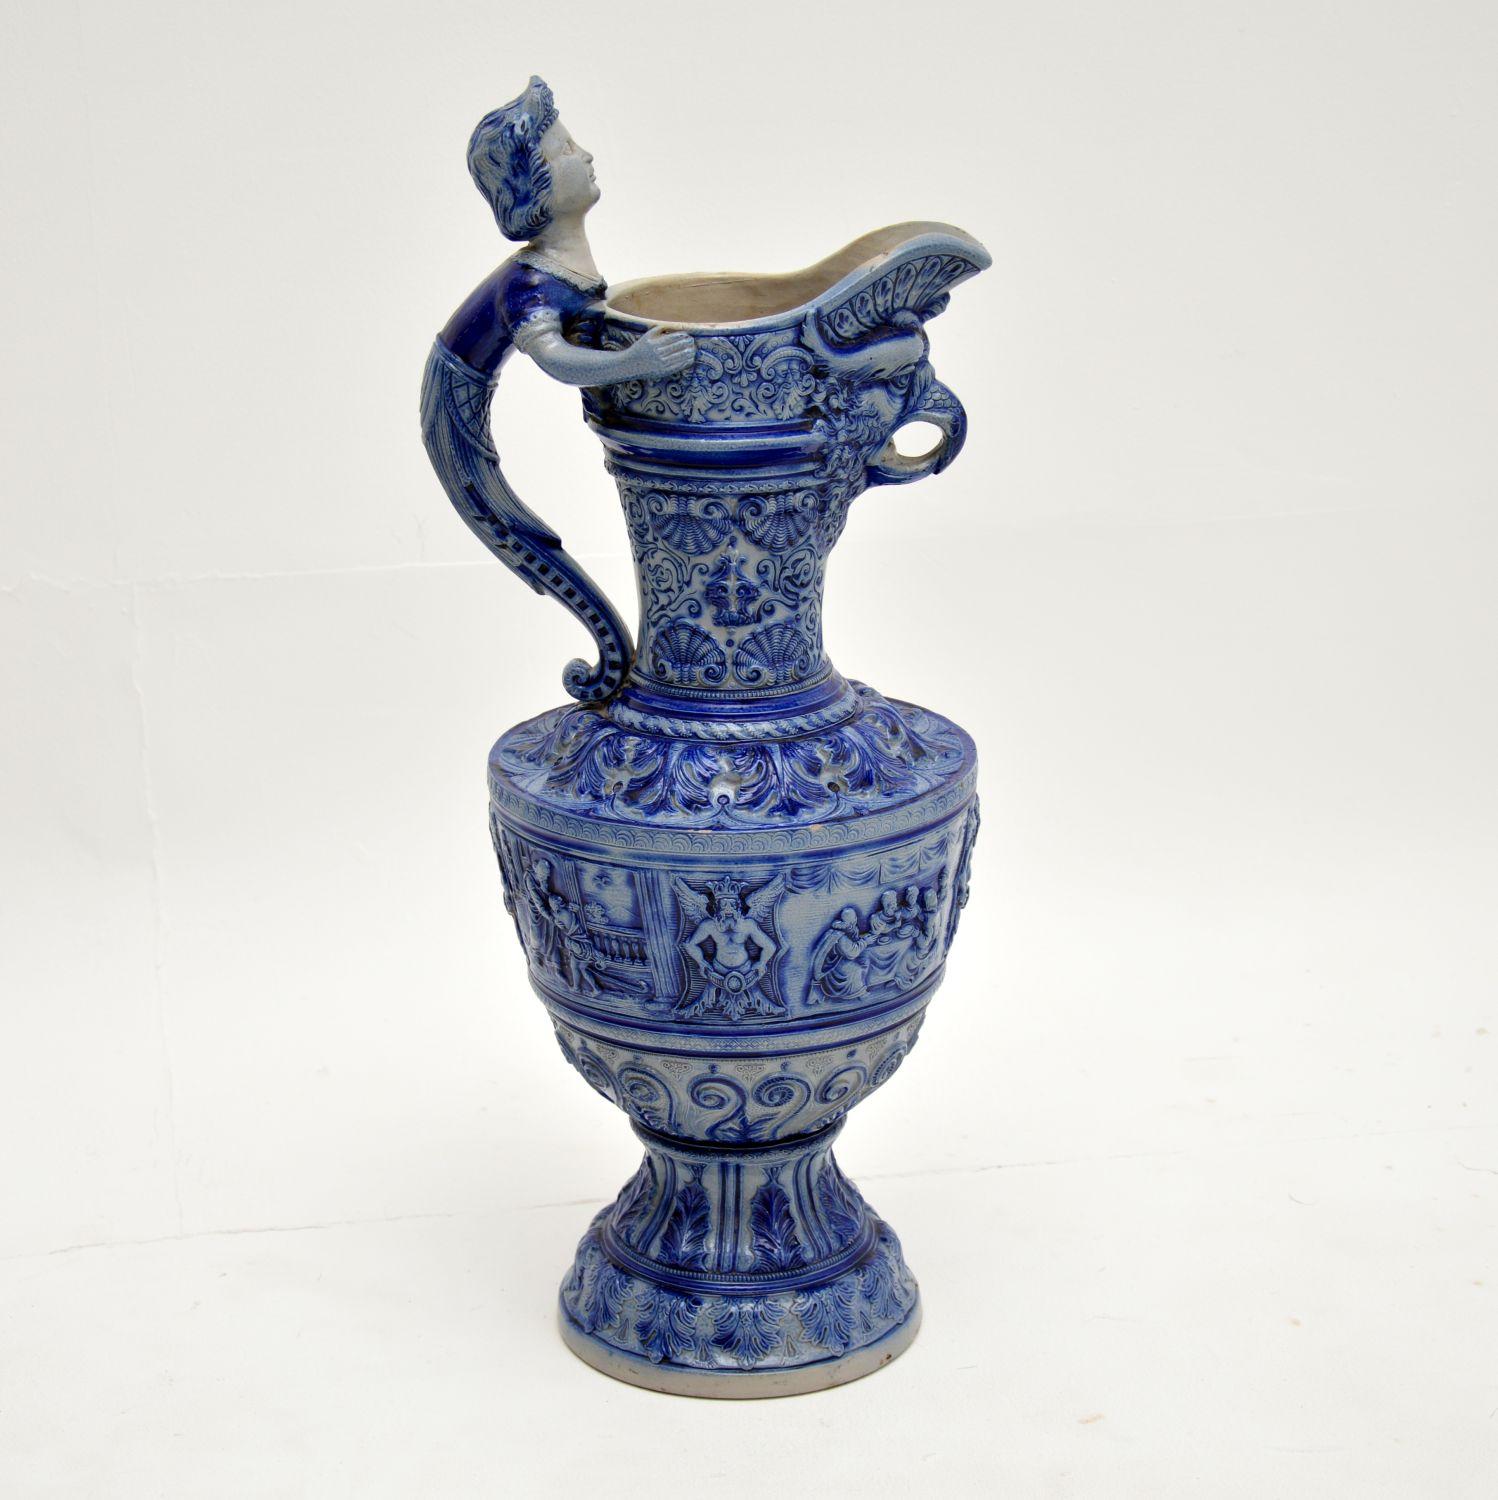 A beautiful and impressive antique Westerwald pottery ewer, made in Germany around the 1880-1900 period. Westerwald pottery was made in the Westerwaldkreis area in the Rheinland. It has a distinctive look, and is of extremely fine quality.

This